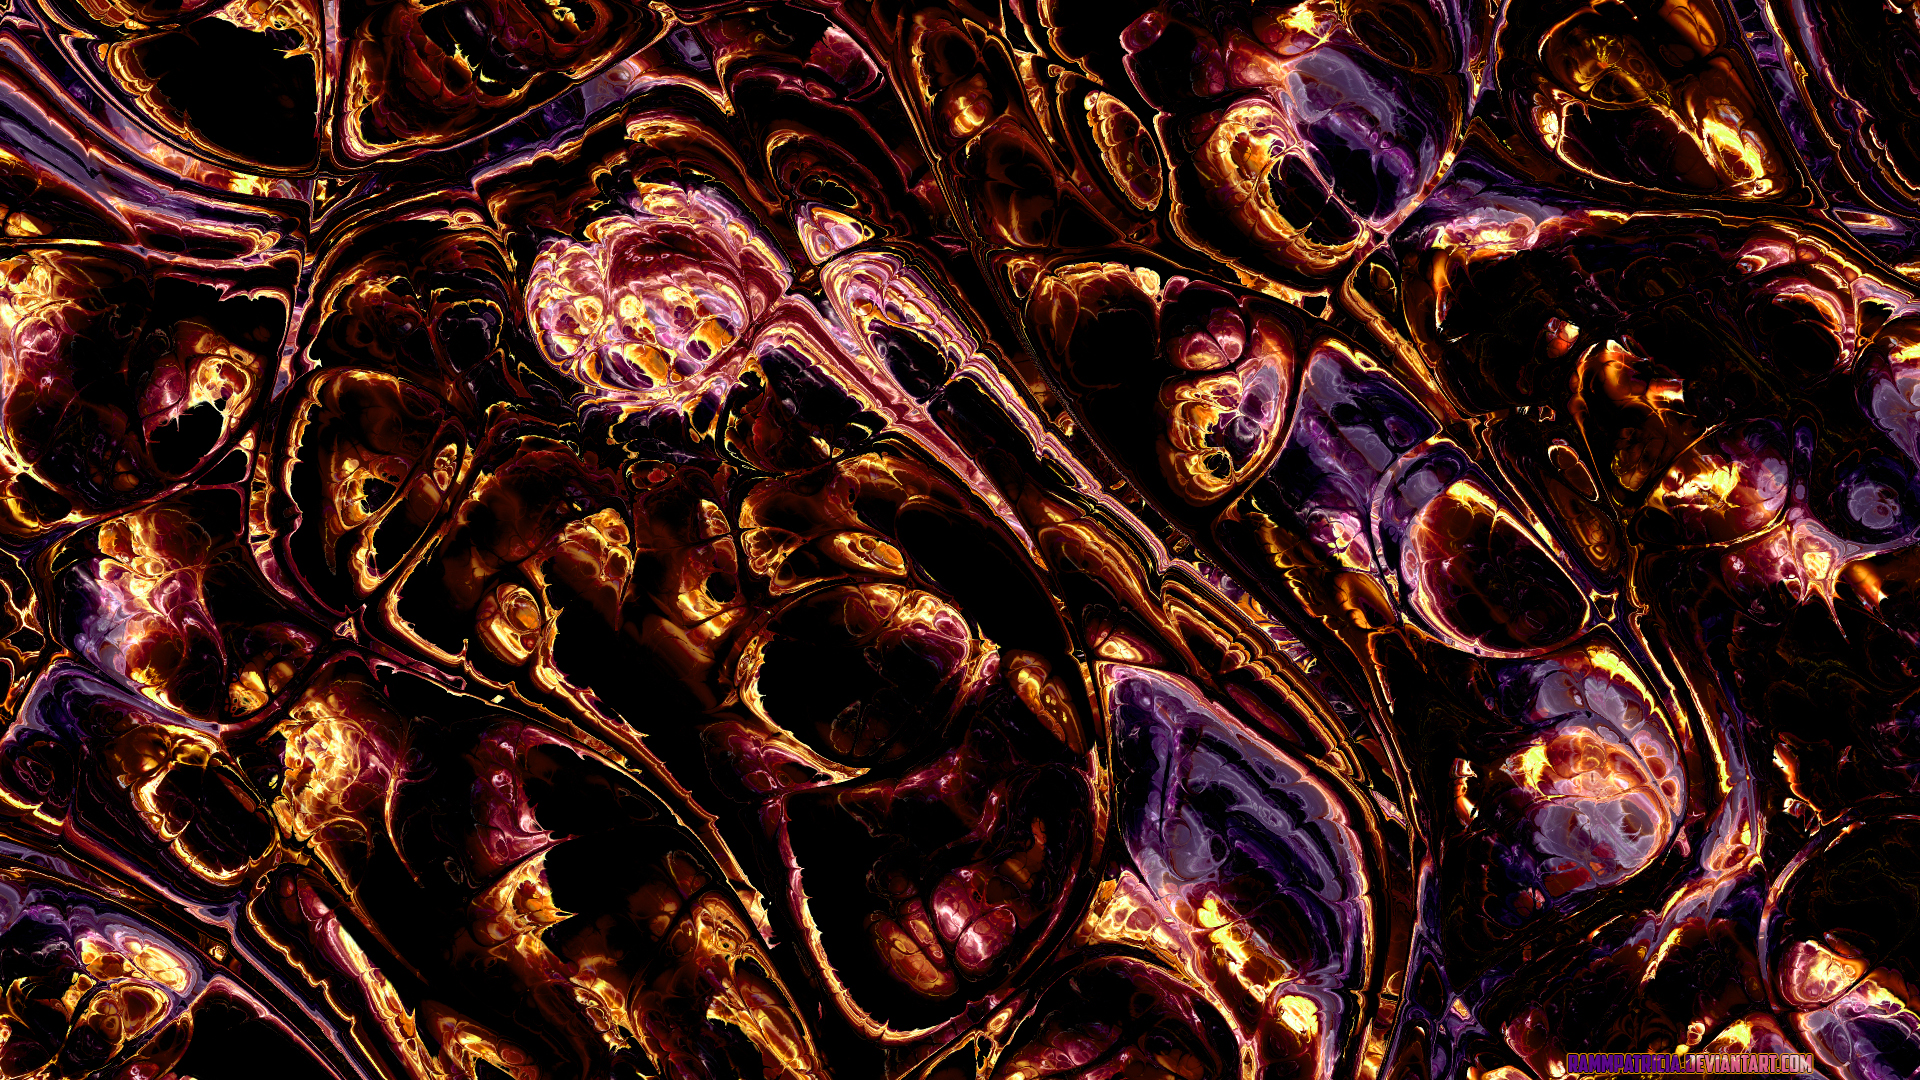 RammPatricia Abstract Horror Halloween Spooky Creepy Insect Spider Liquid Nightmare Watermarked 1920x1080